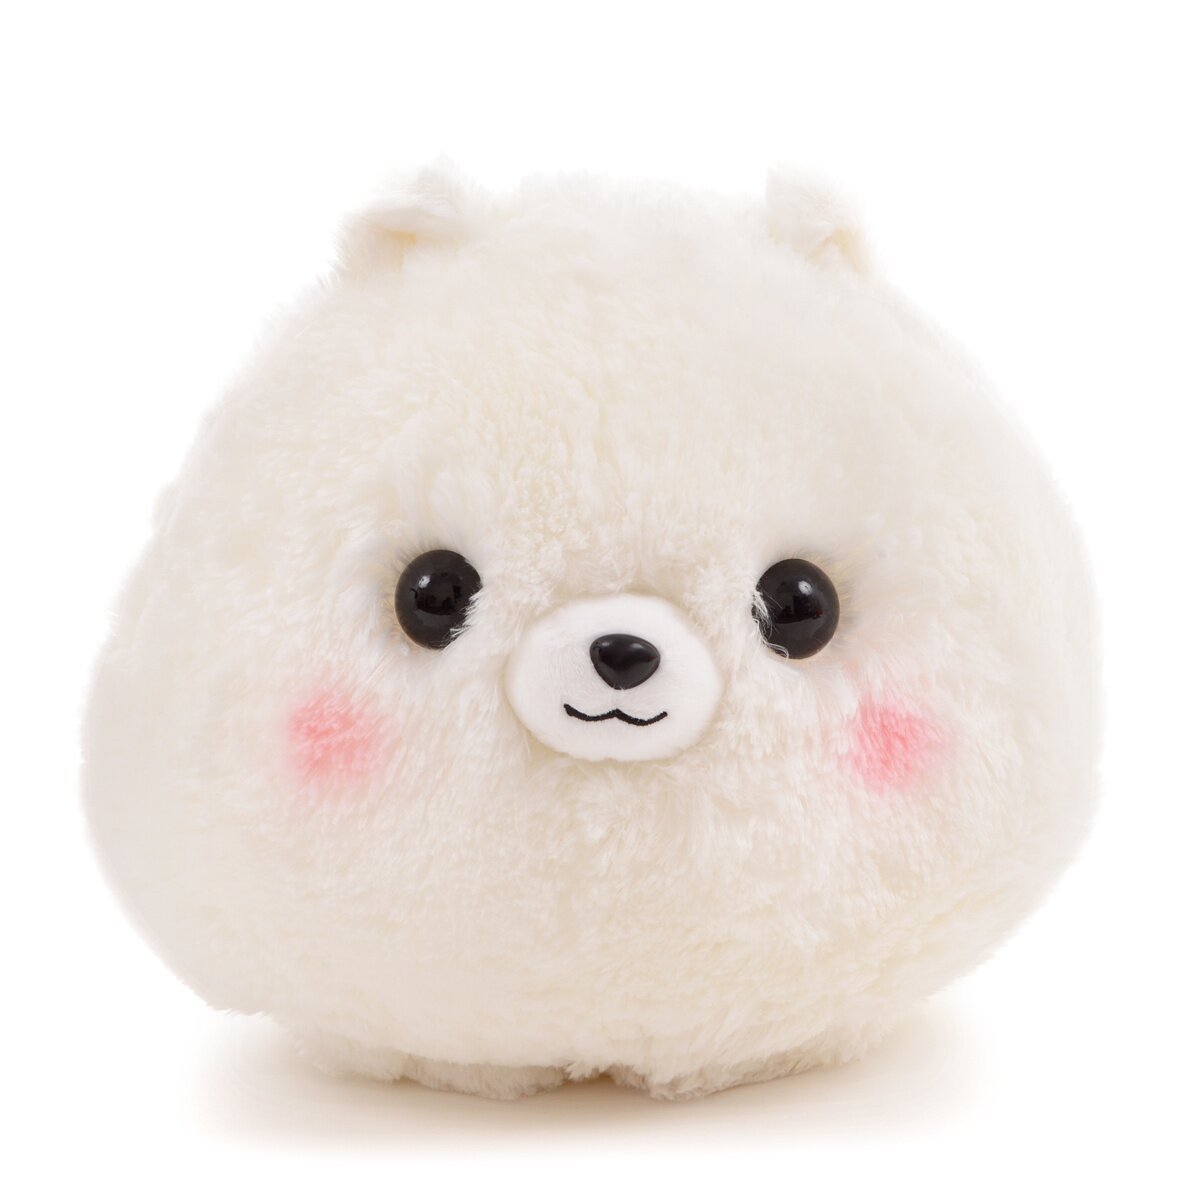 Fuuto Tantei (Fuuto PI) Merch  Buy from Goods Republic - Online Store for  Official Japanese Merchandise, Featuring Plush